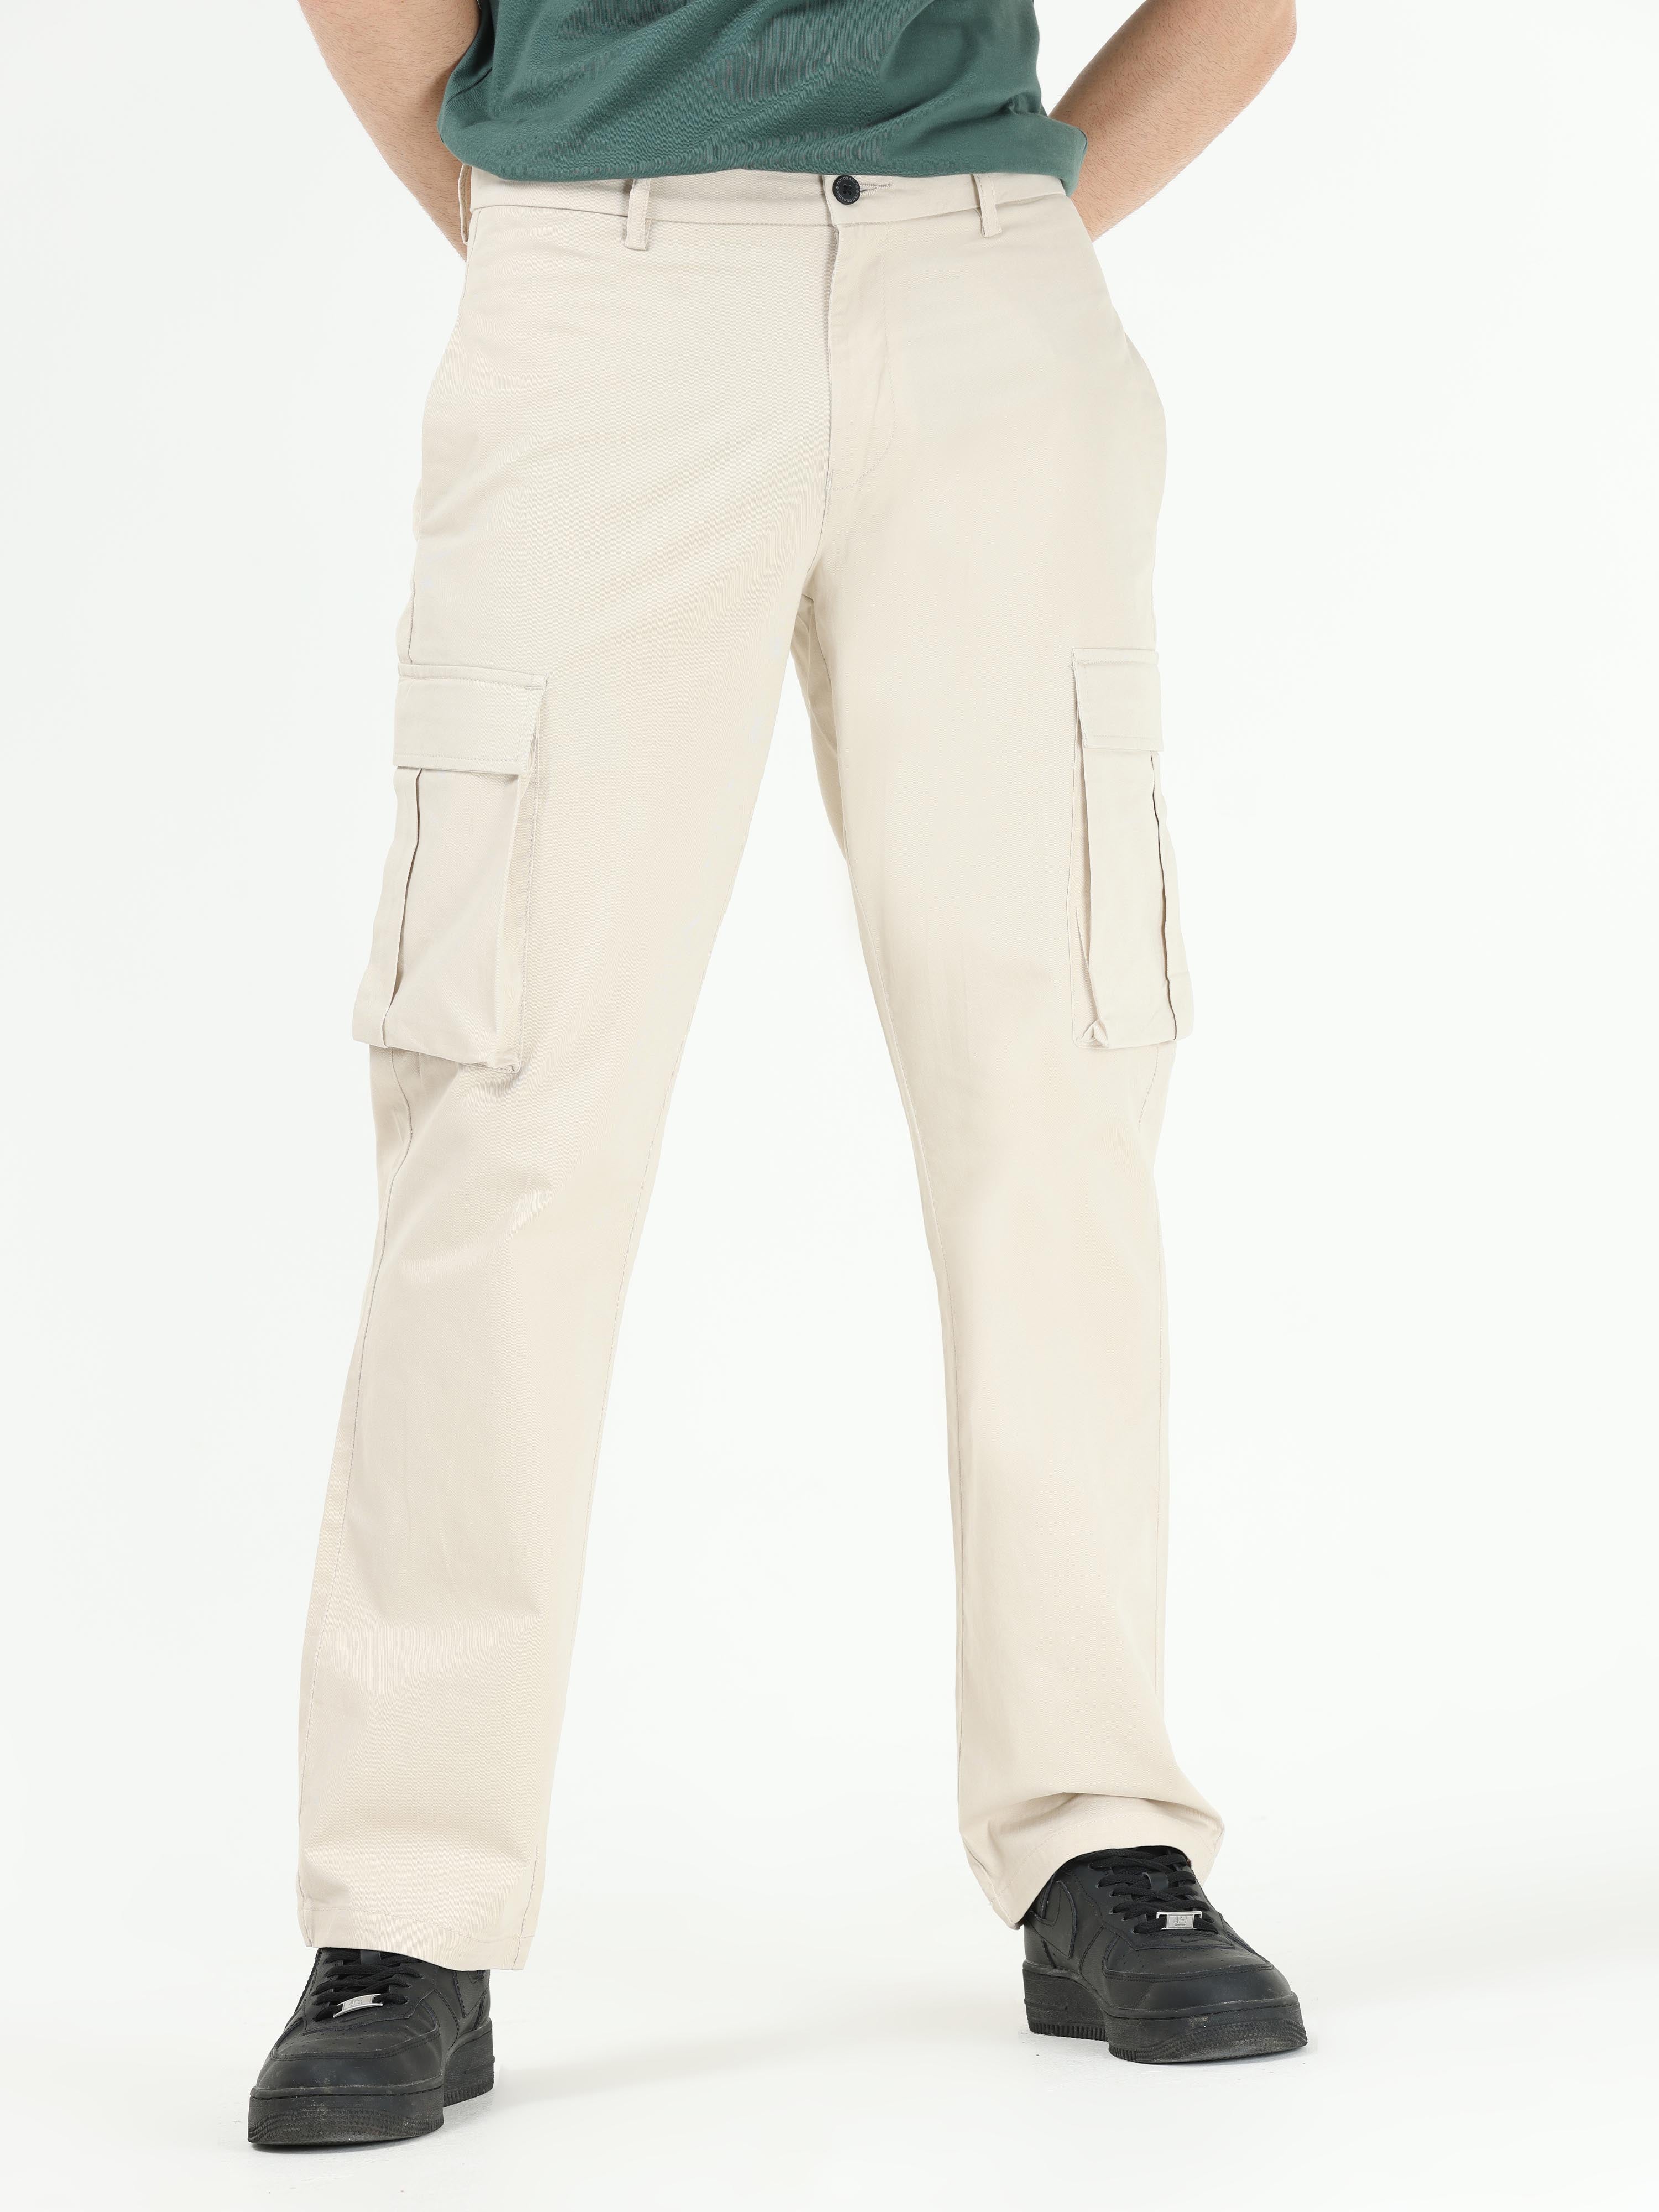 rust cargo pants - buy cargo pants online at great price – DAKS NEO  CLOTHING CO.INDIA